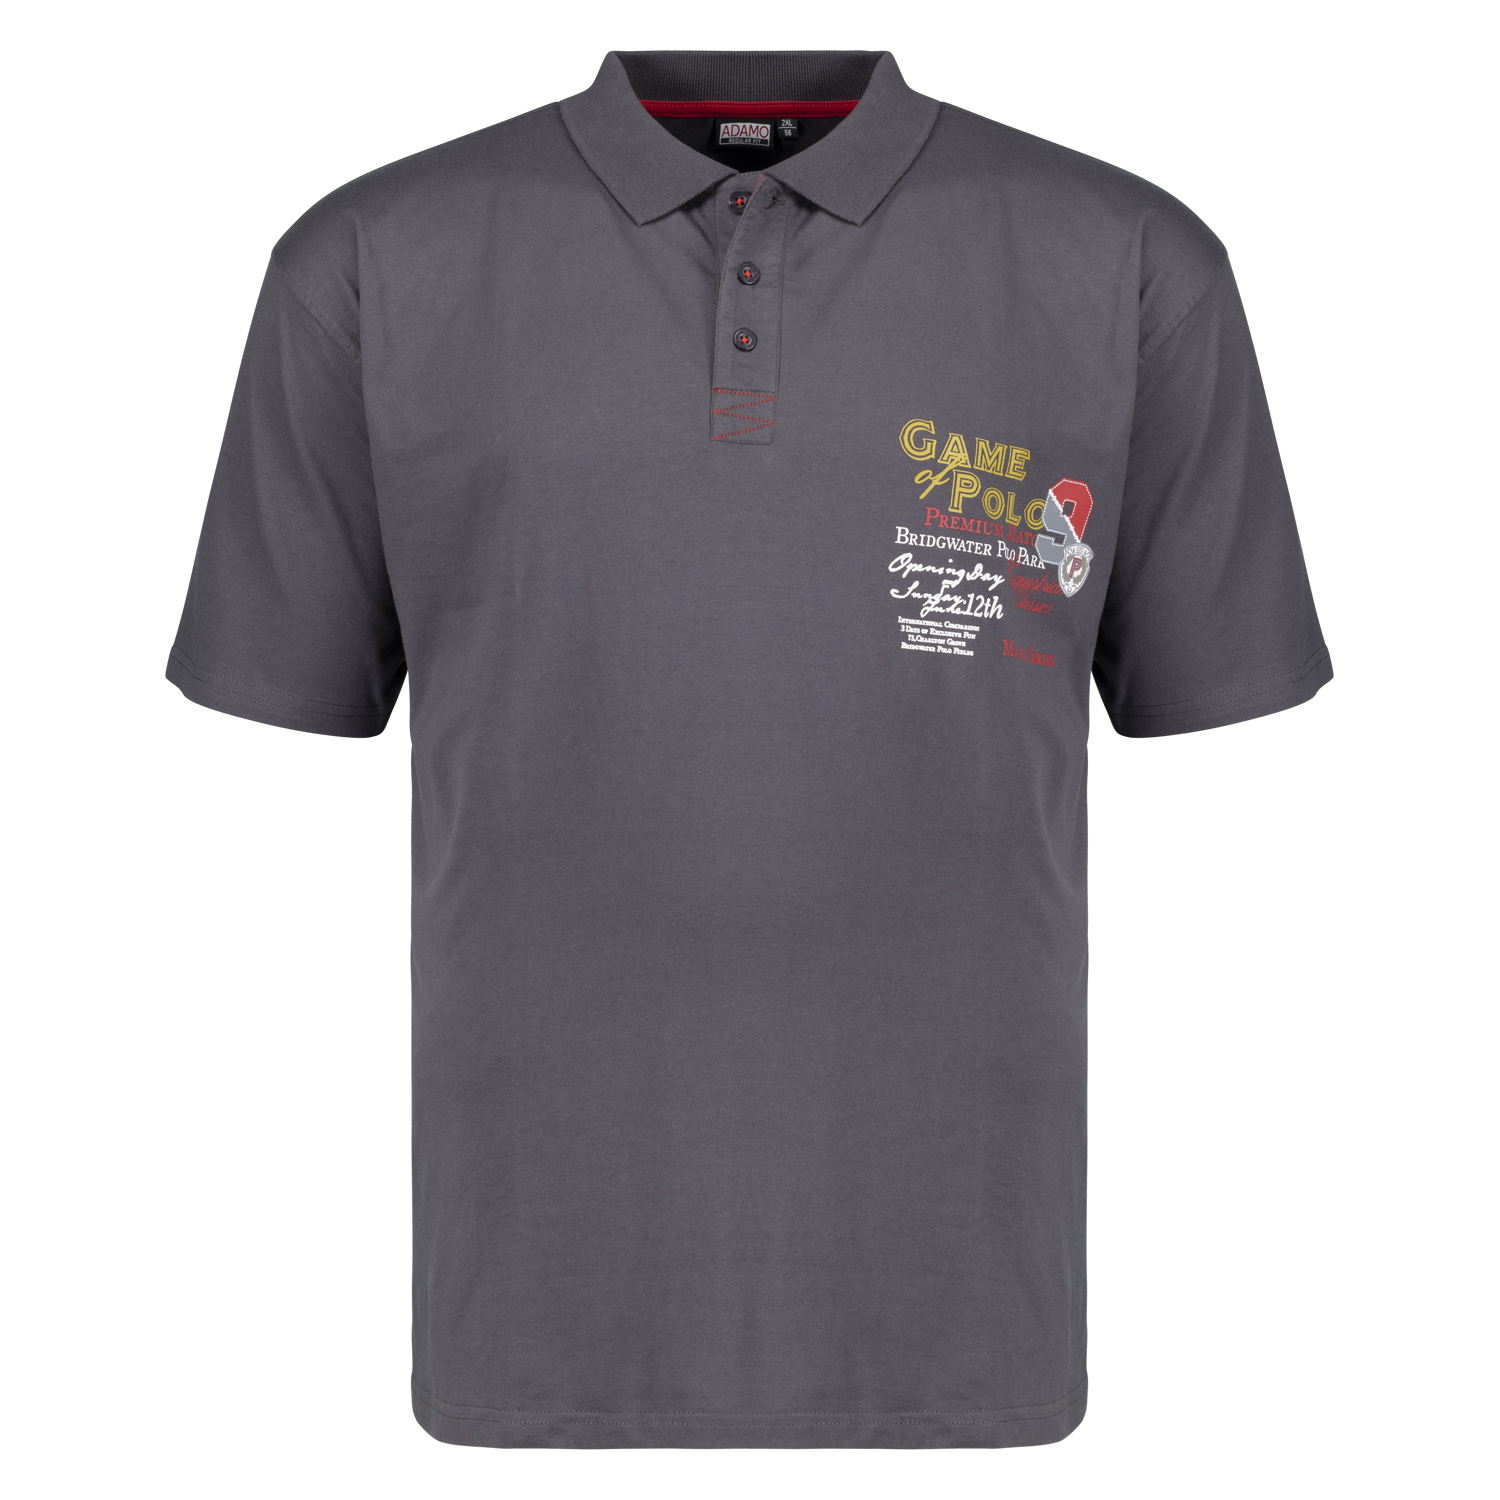 Short sleeve polo shirt with print REGULAR FIT series Perth by Adamo in grey up to oversize 12XL